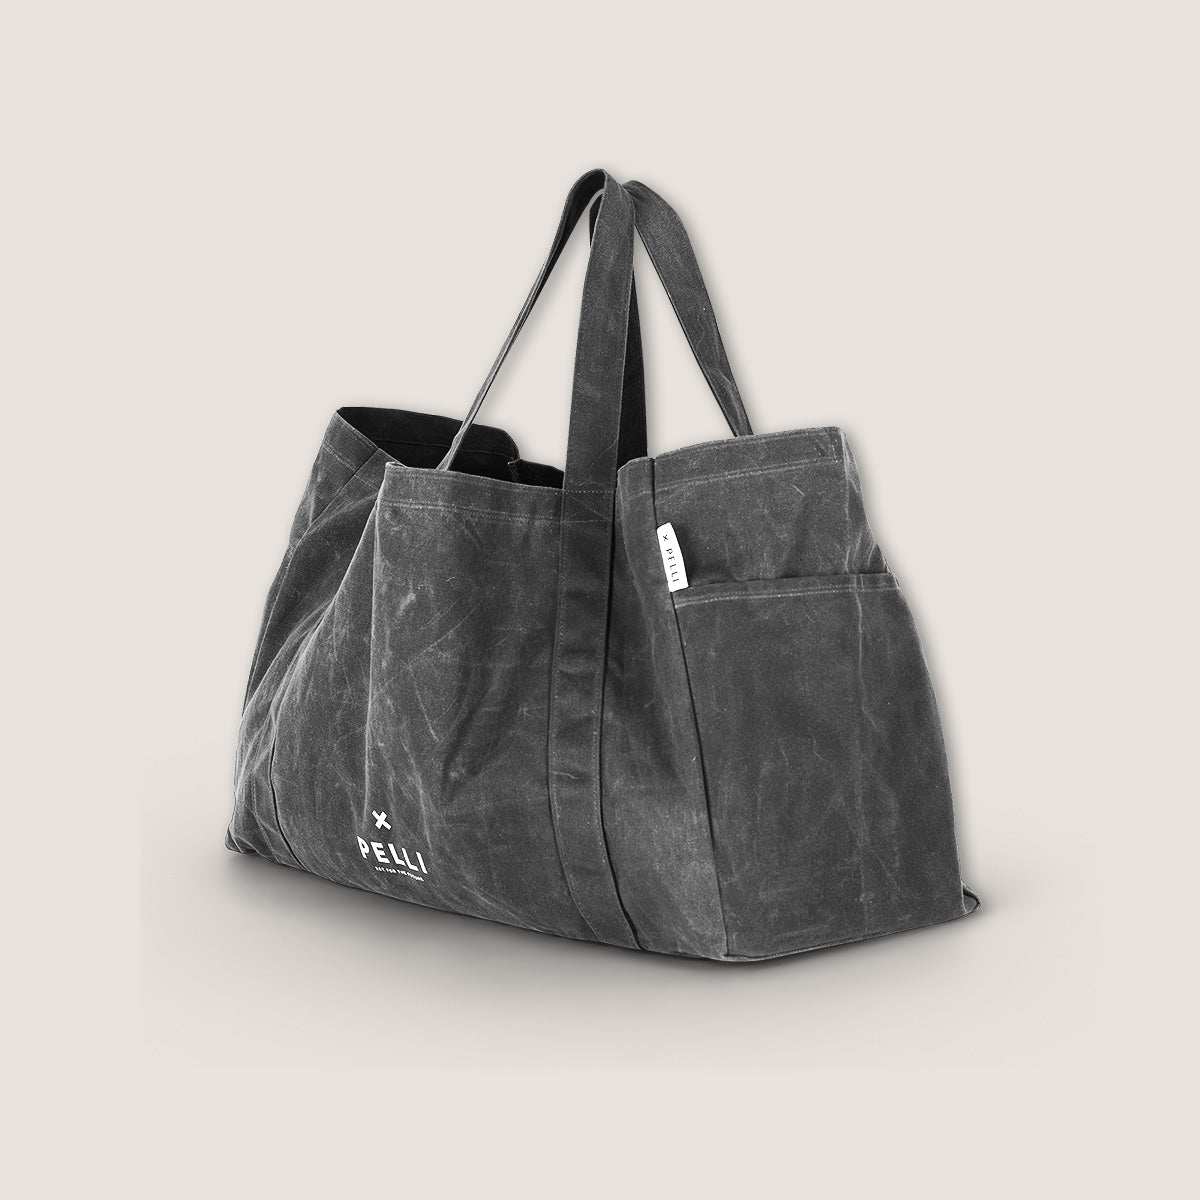 Extra Large Beach Bag in Black